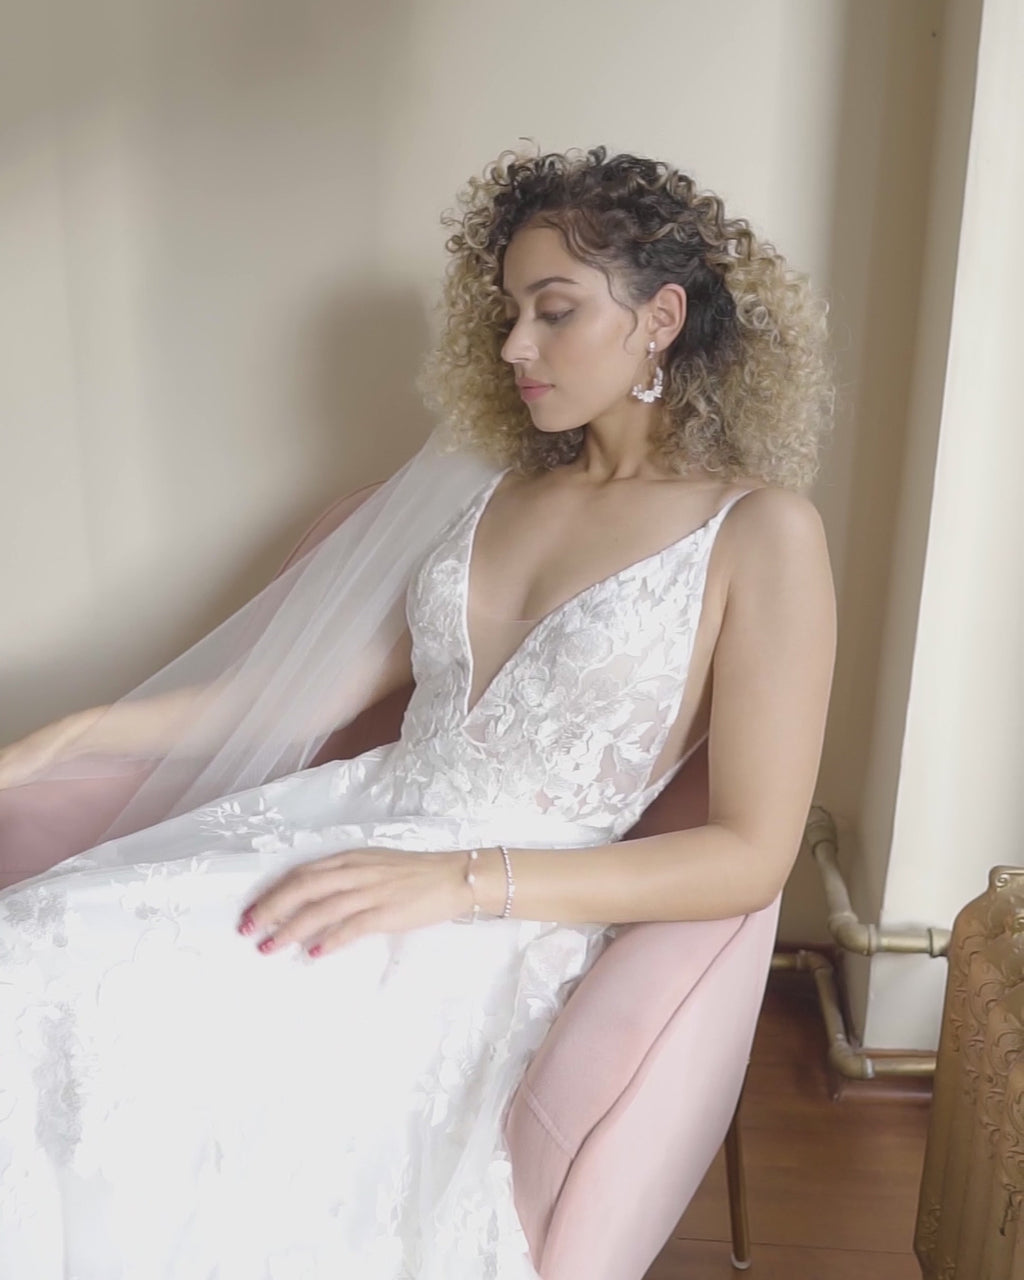 Video of a bride wearing the Astra Earrings and matching Astra Bracelet.